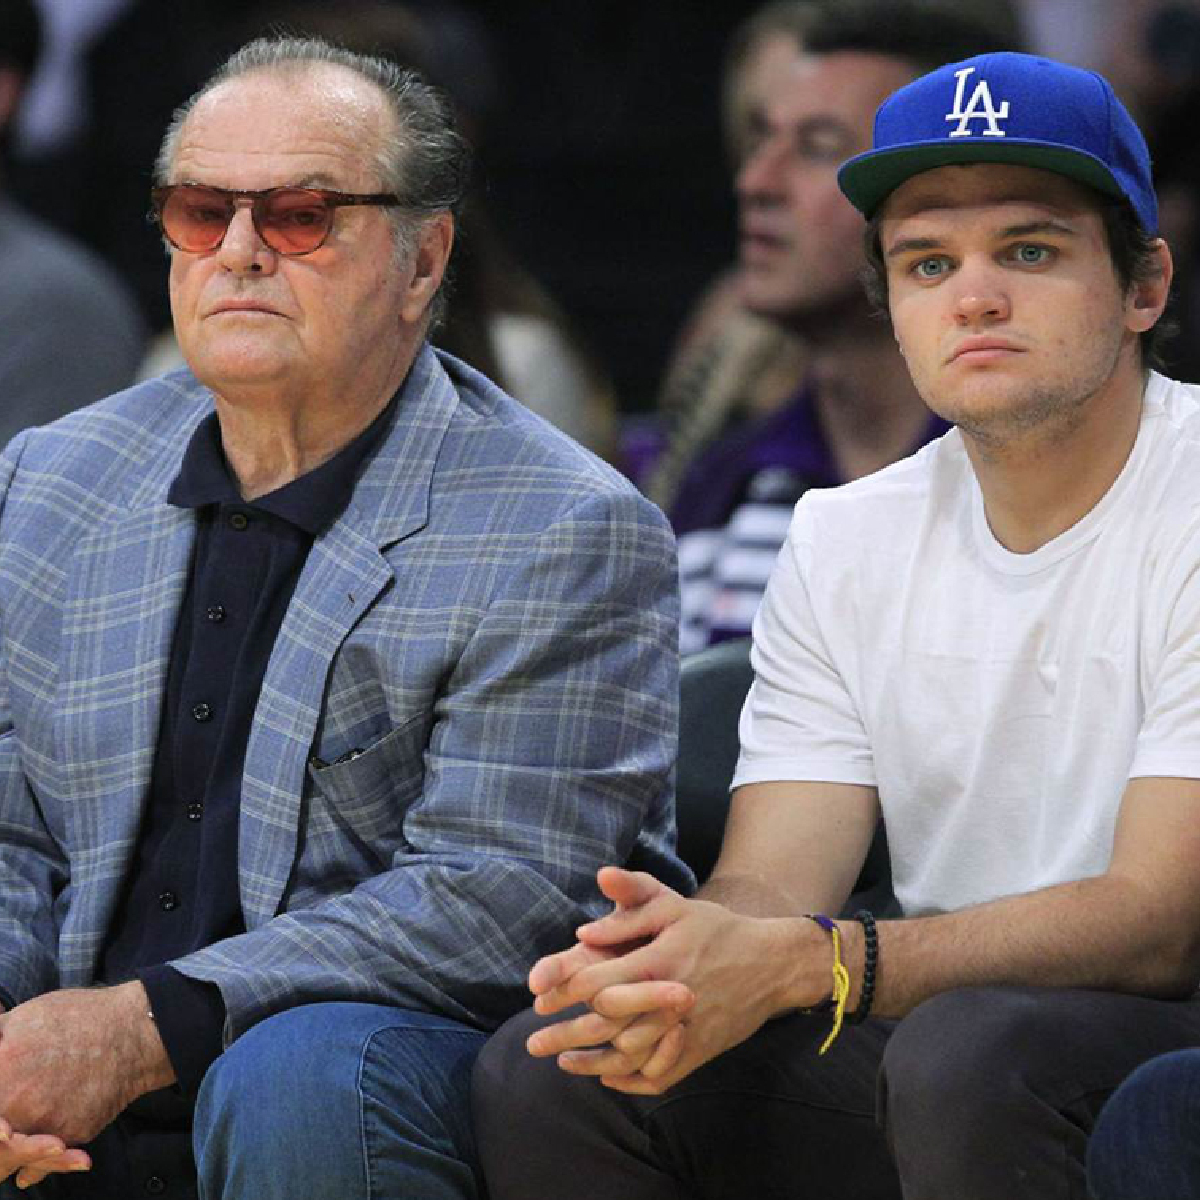 Jack Nicholson and his son